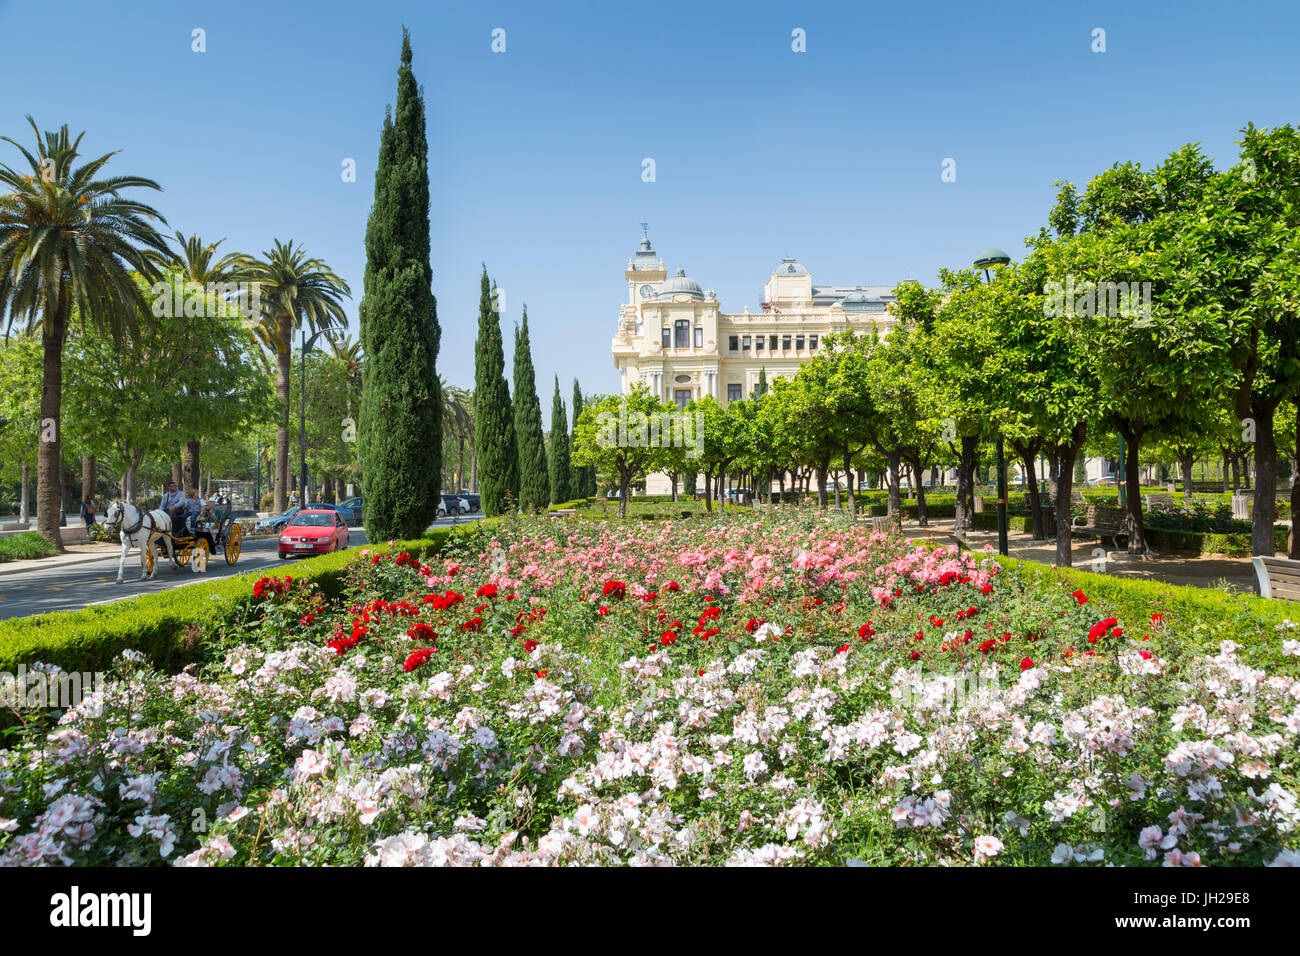 View of Jardines de Pedro Luis Alonso and Town Hall Palace (Ayuntamiento), Malaga, Costa del Sol, Andalusia, Spain, Europe Stock Photo